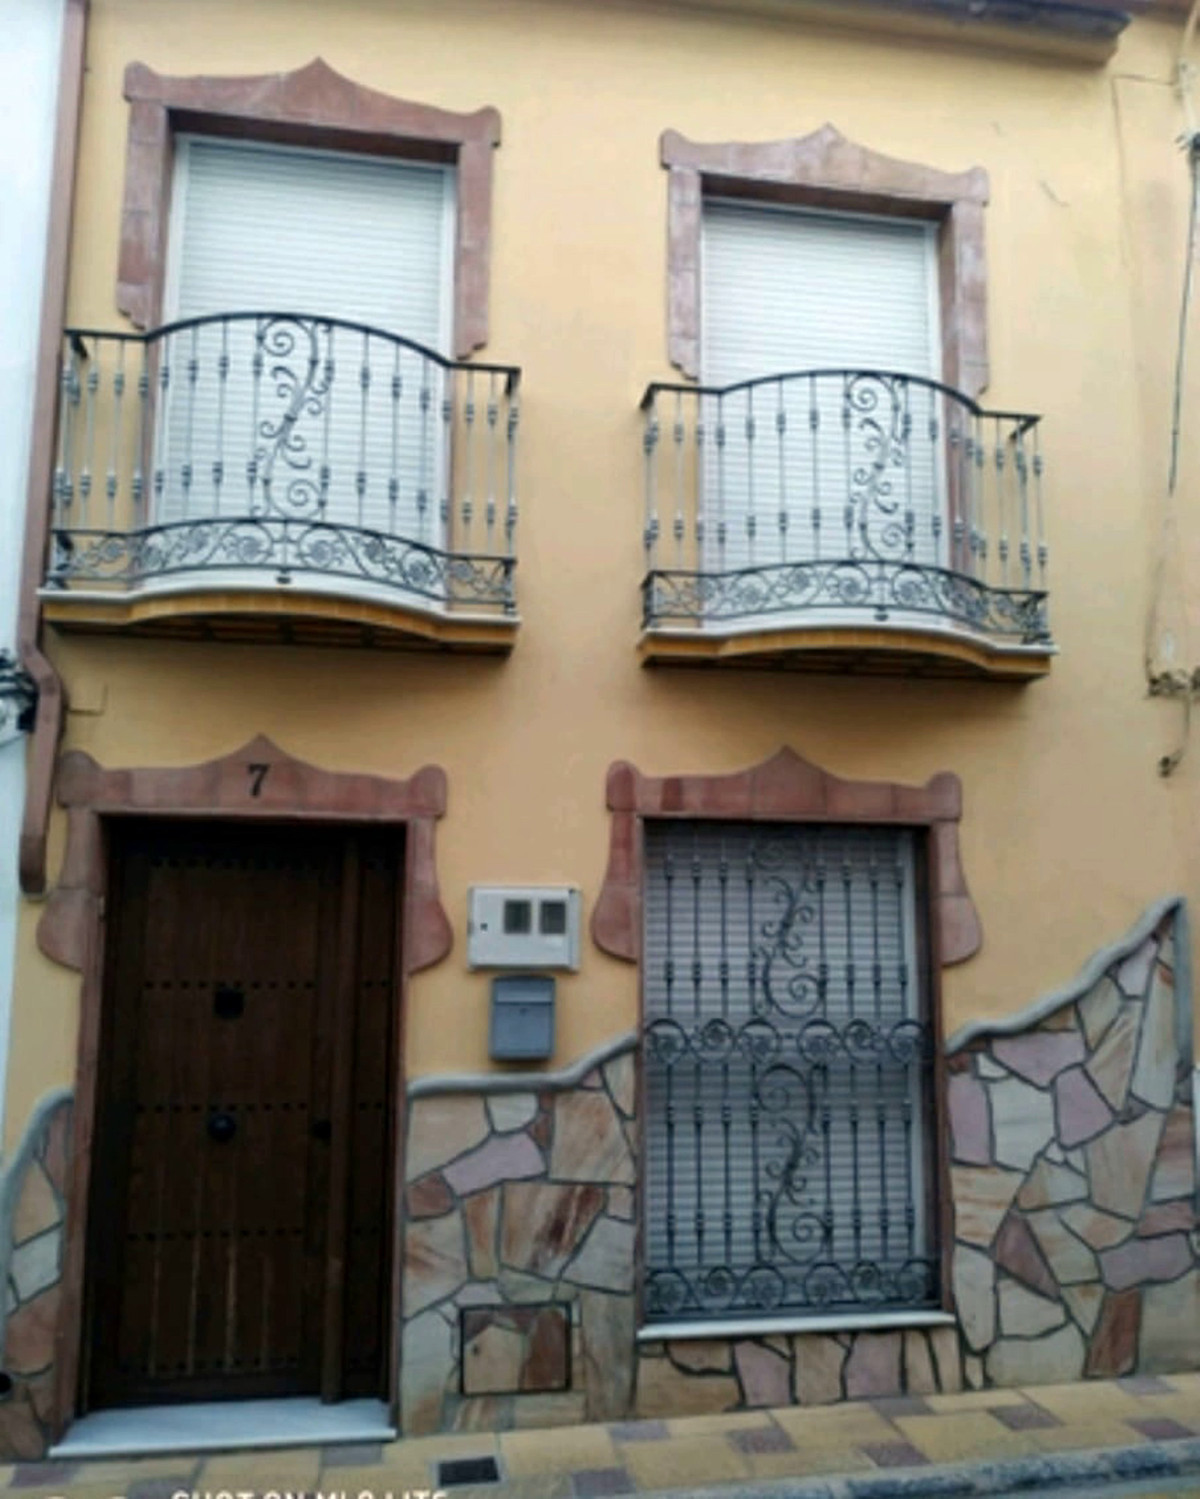 						Townhouse  Terraced
													for sale 
																			 in Coín
					